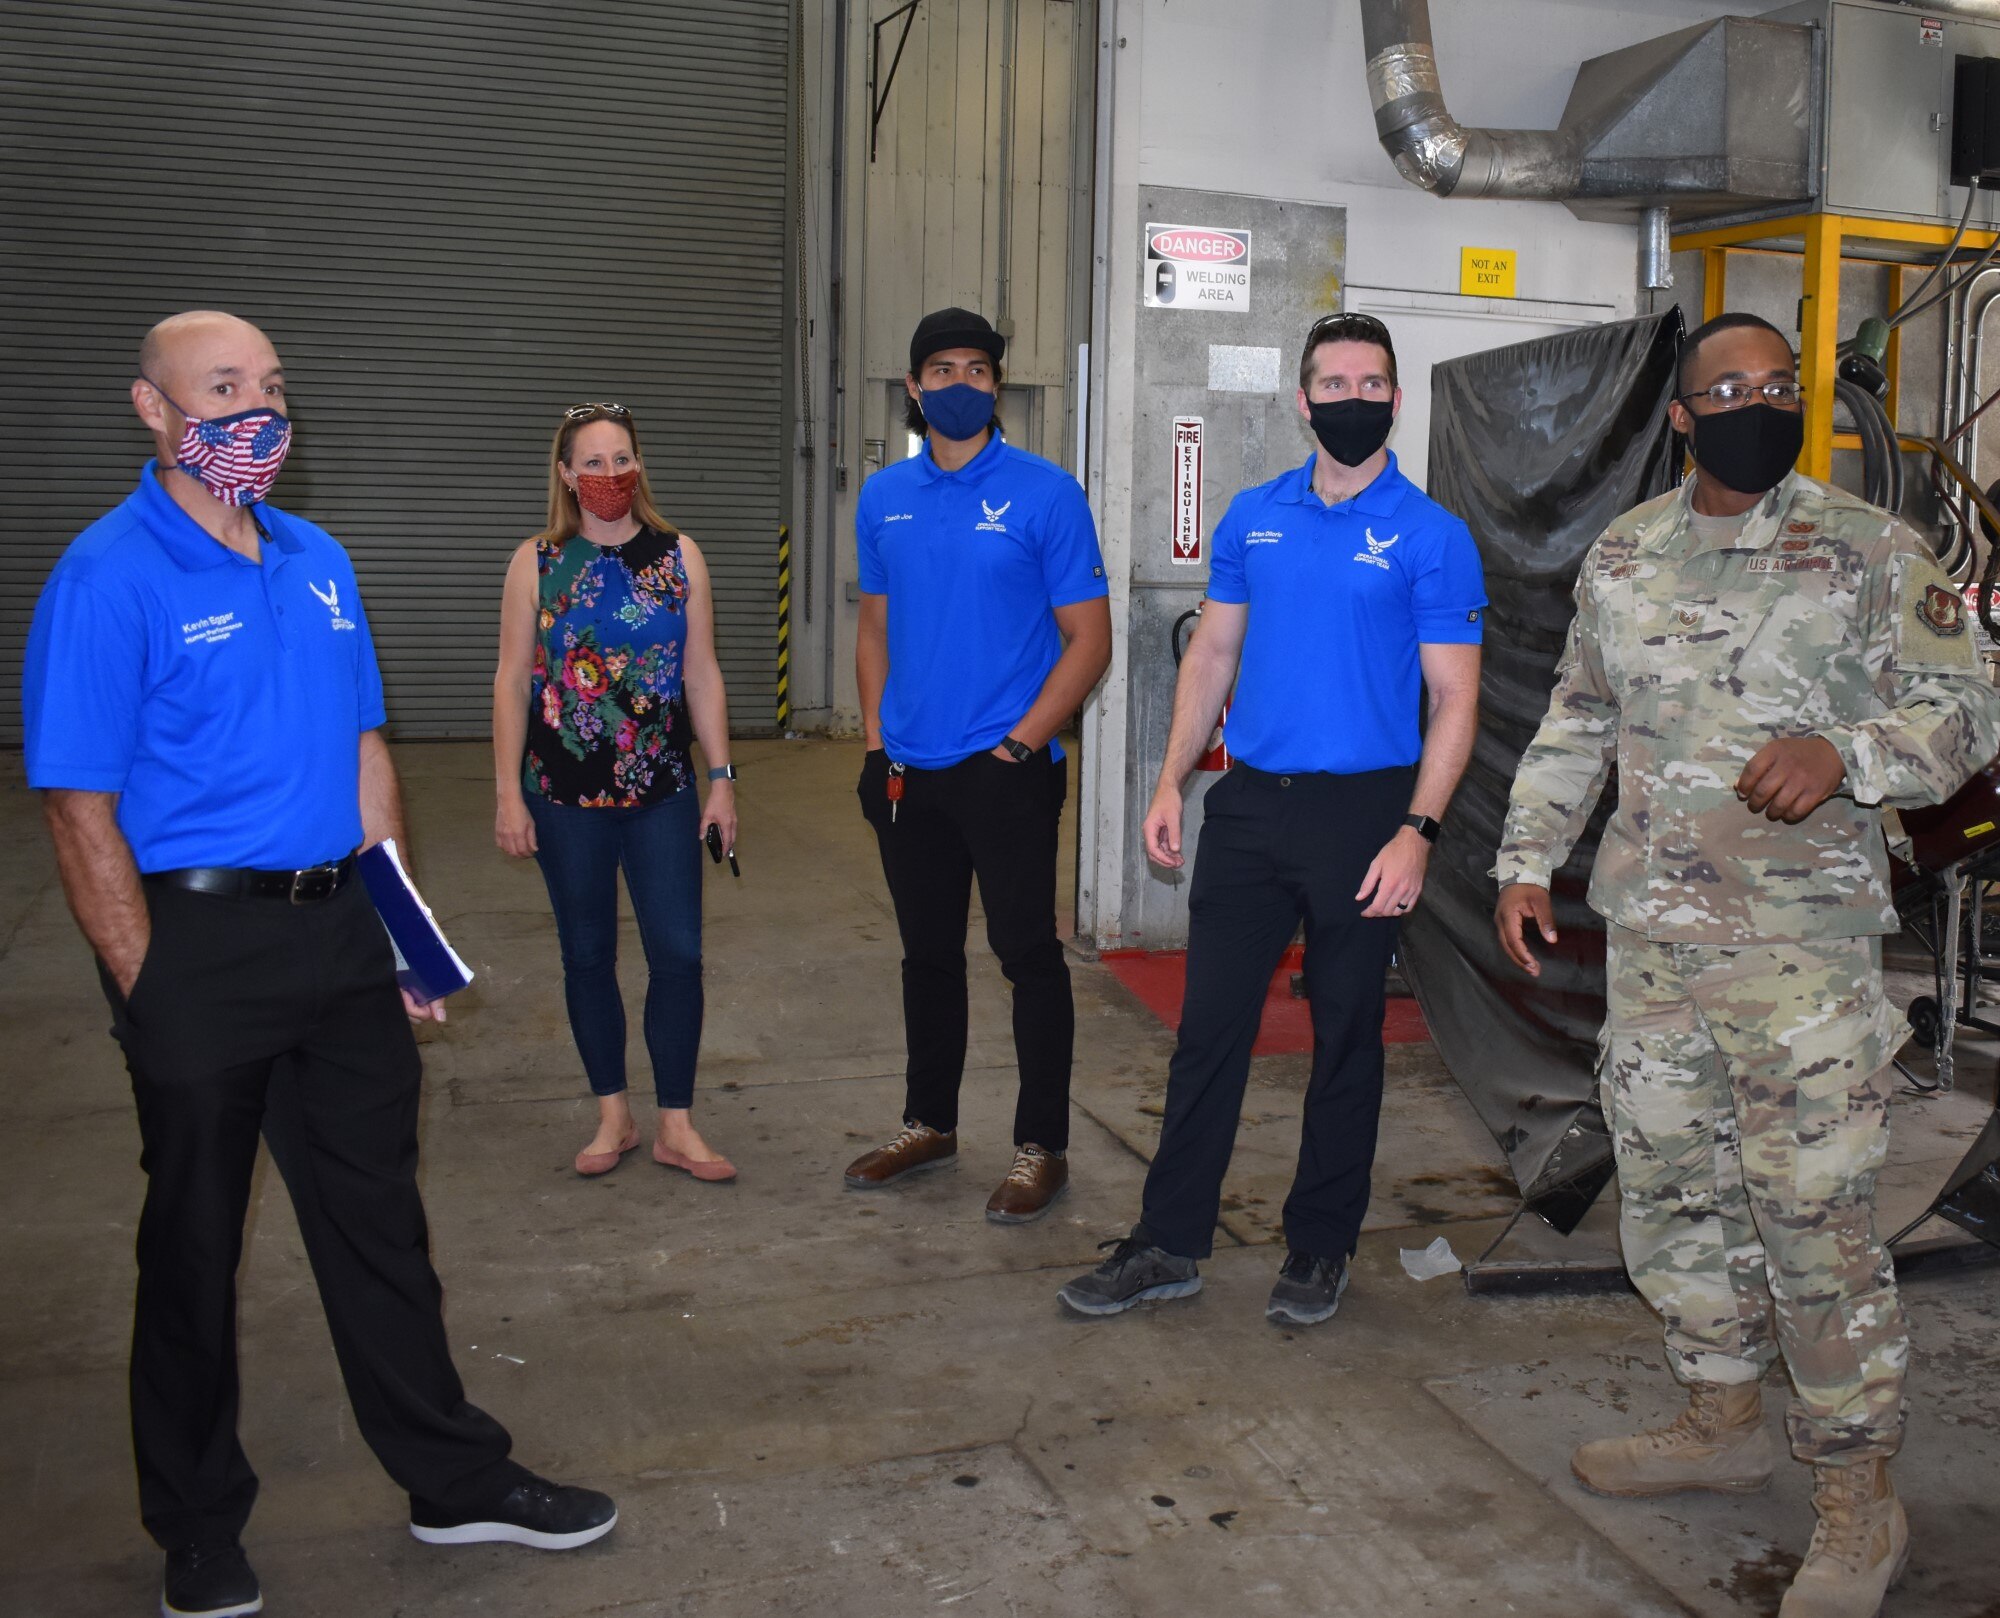 Tech. Sgt. Jamal Goode, 75th Logistics Readiness Squadron, gives a tour of Vehicle Maintenance to members of the Operational Support Team.